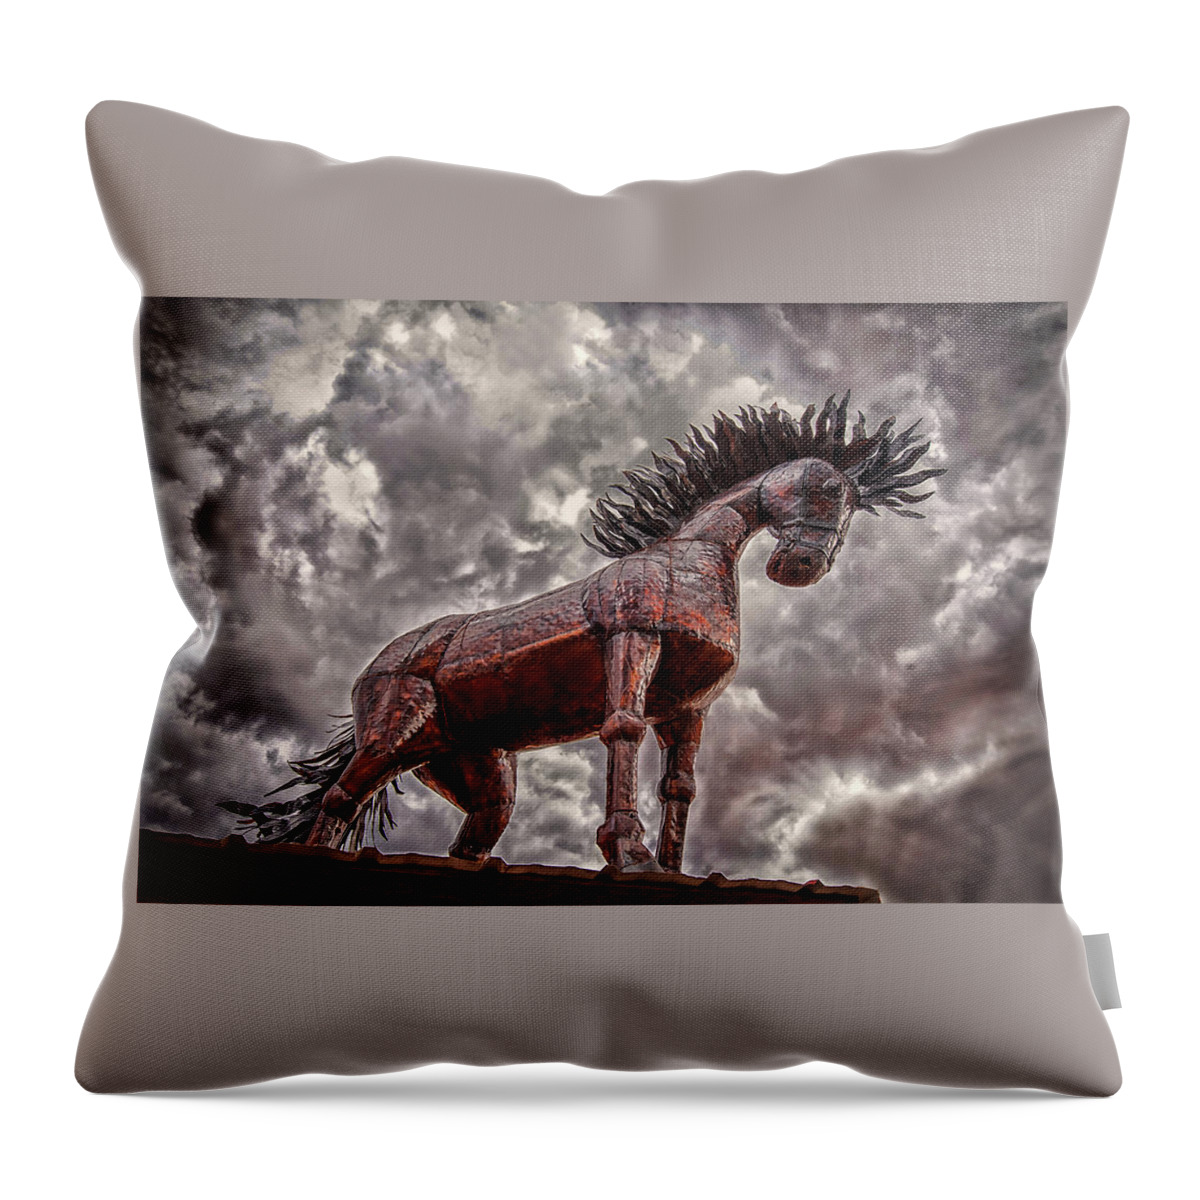 Santa Fe Throw Pillow featuring the photograph Stallion In The Storm by Joe Ownbey